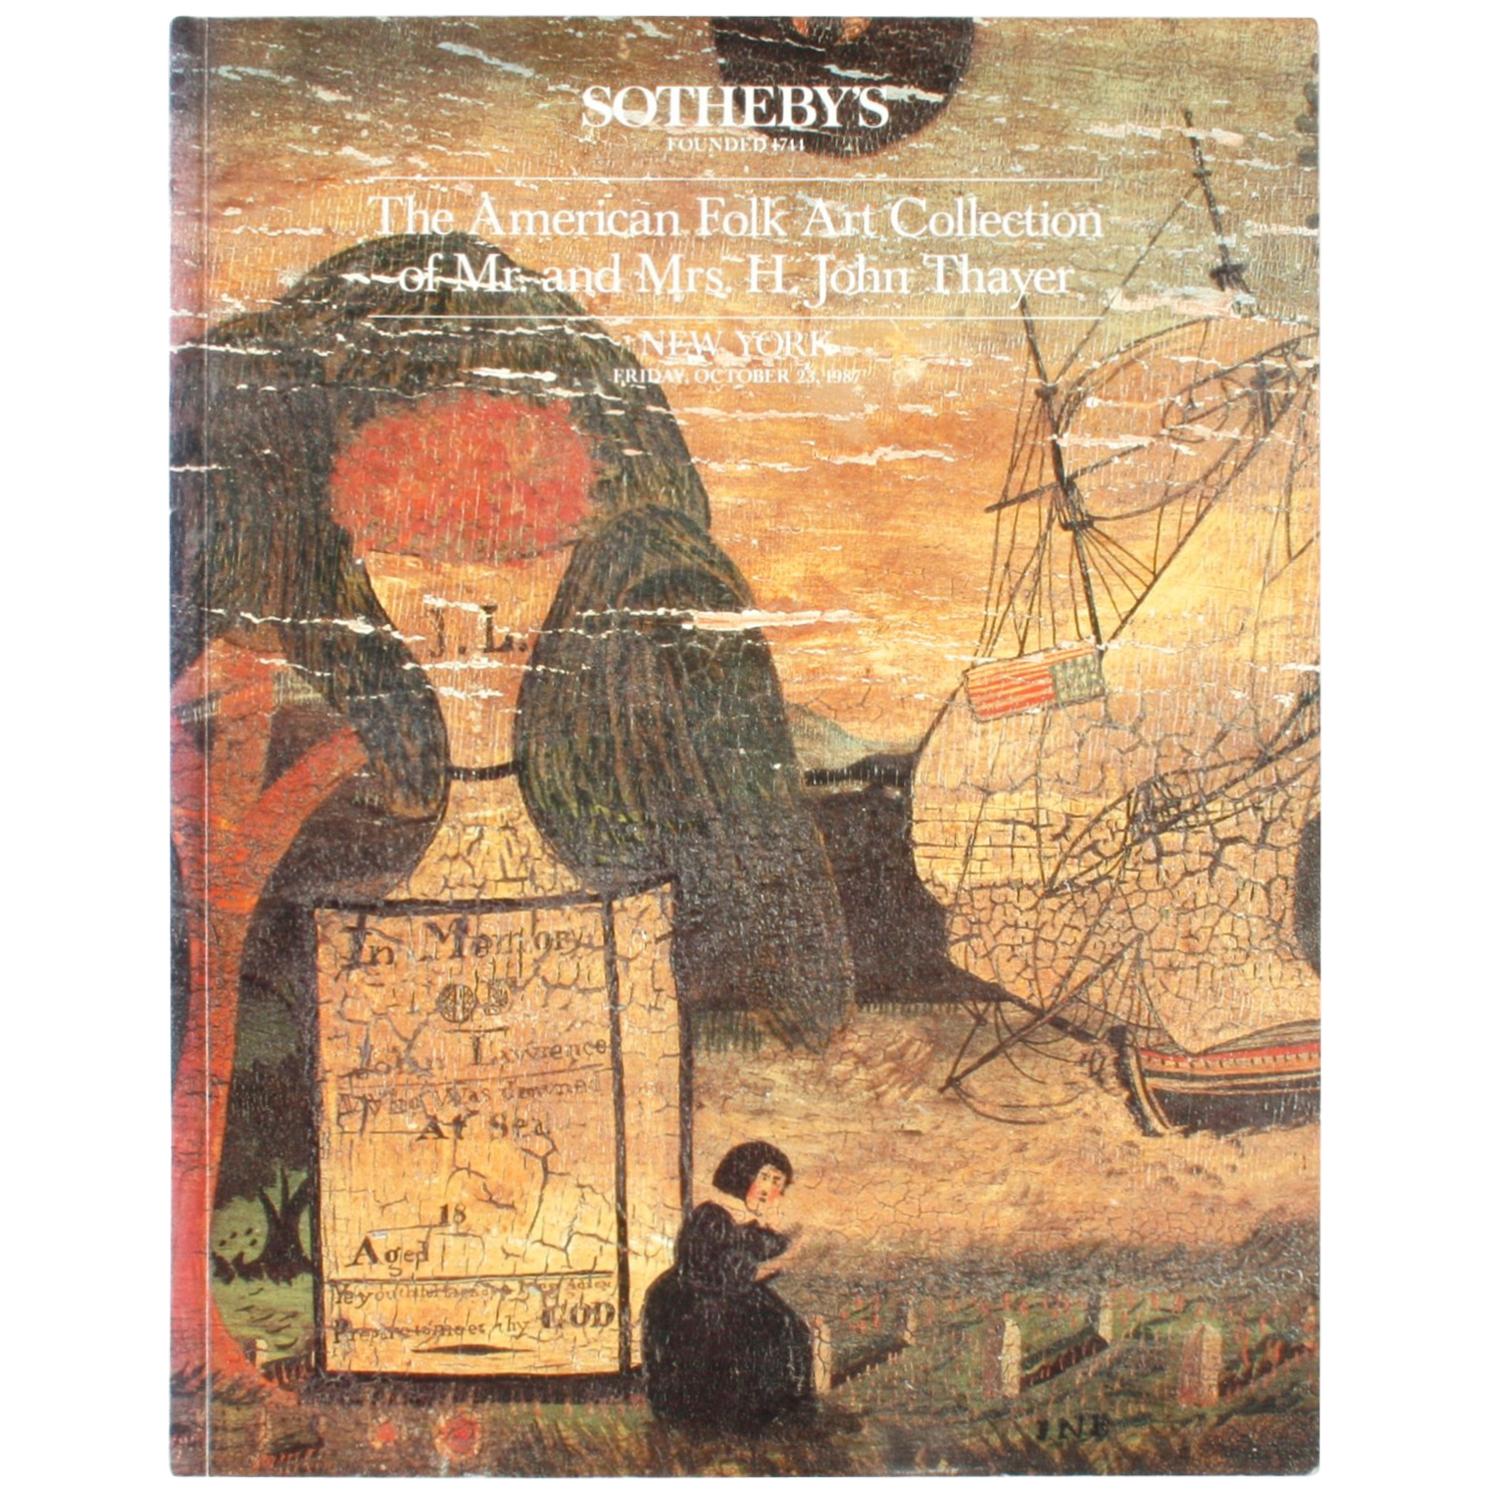 "Sotheby's The American Folk Art Collection of Mr. and Mrs. H. John Thayer" Book